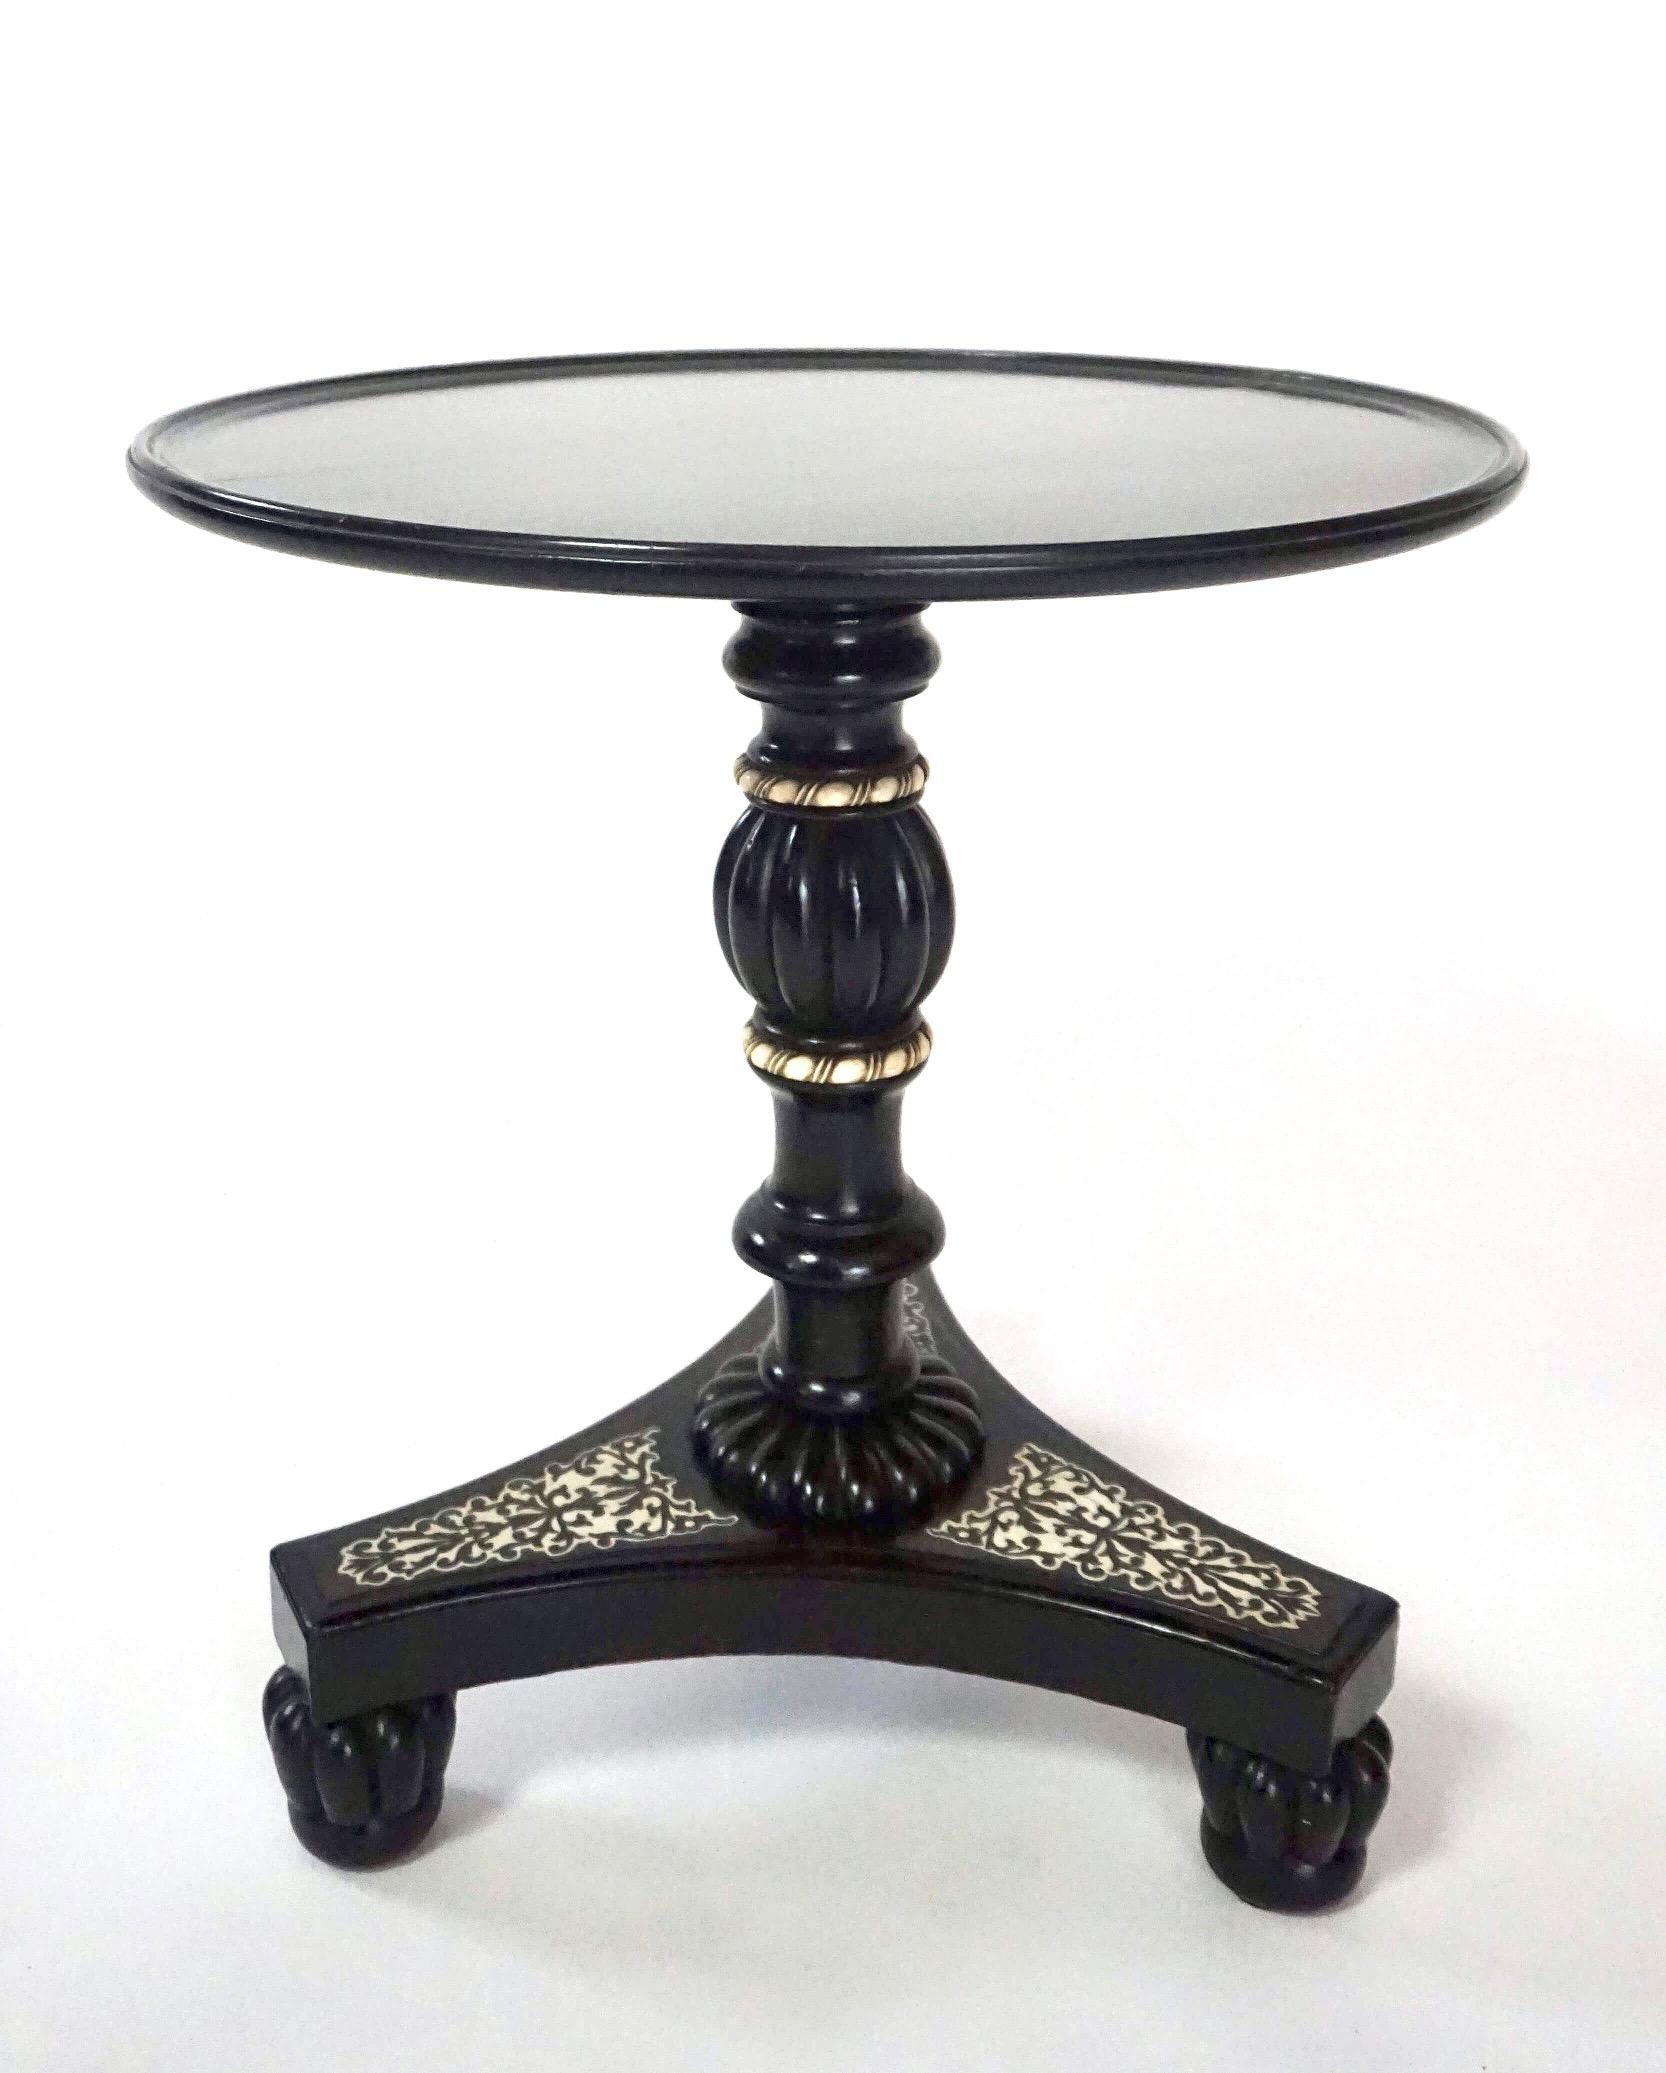 A rare and wonderful circa 1840 Anglo-Indian petite low table in bone-inlaid and mounted ebony, the round dished top on carved and turned pedestal joining concave platform base on reeded tapered feet. Perfect scale for use beside a club chair.